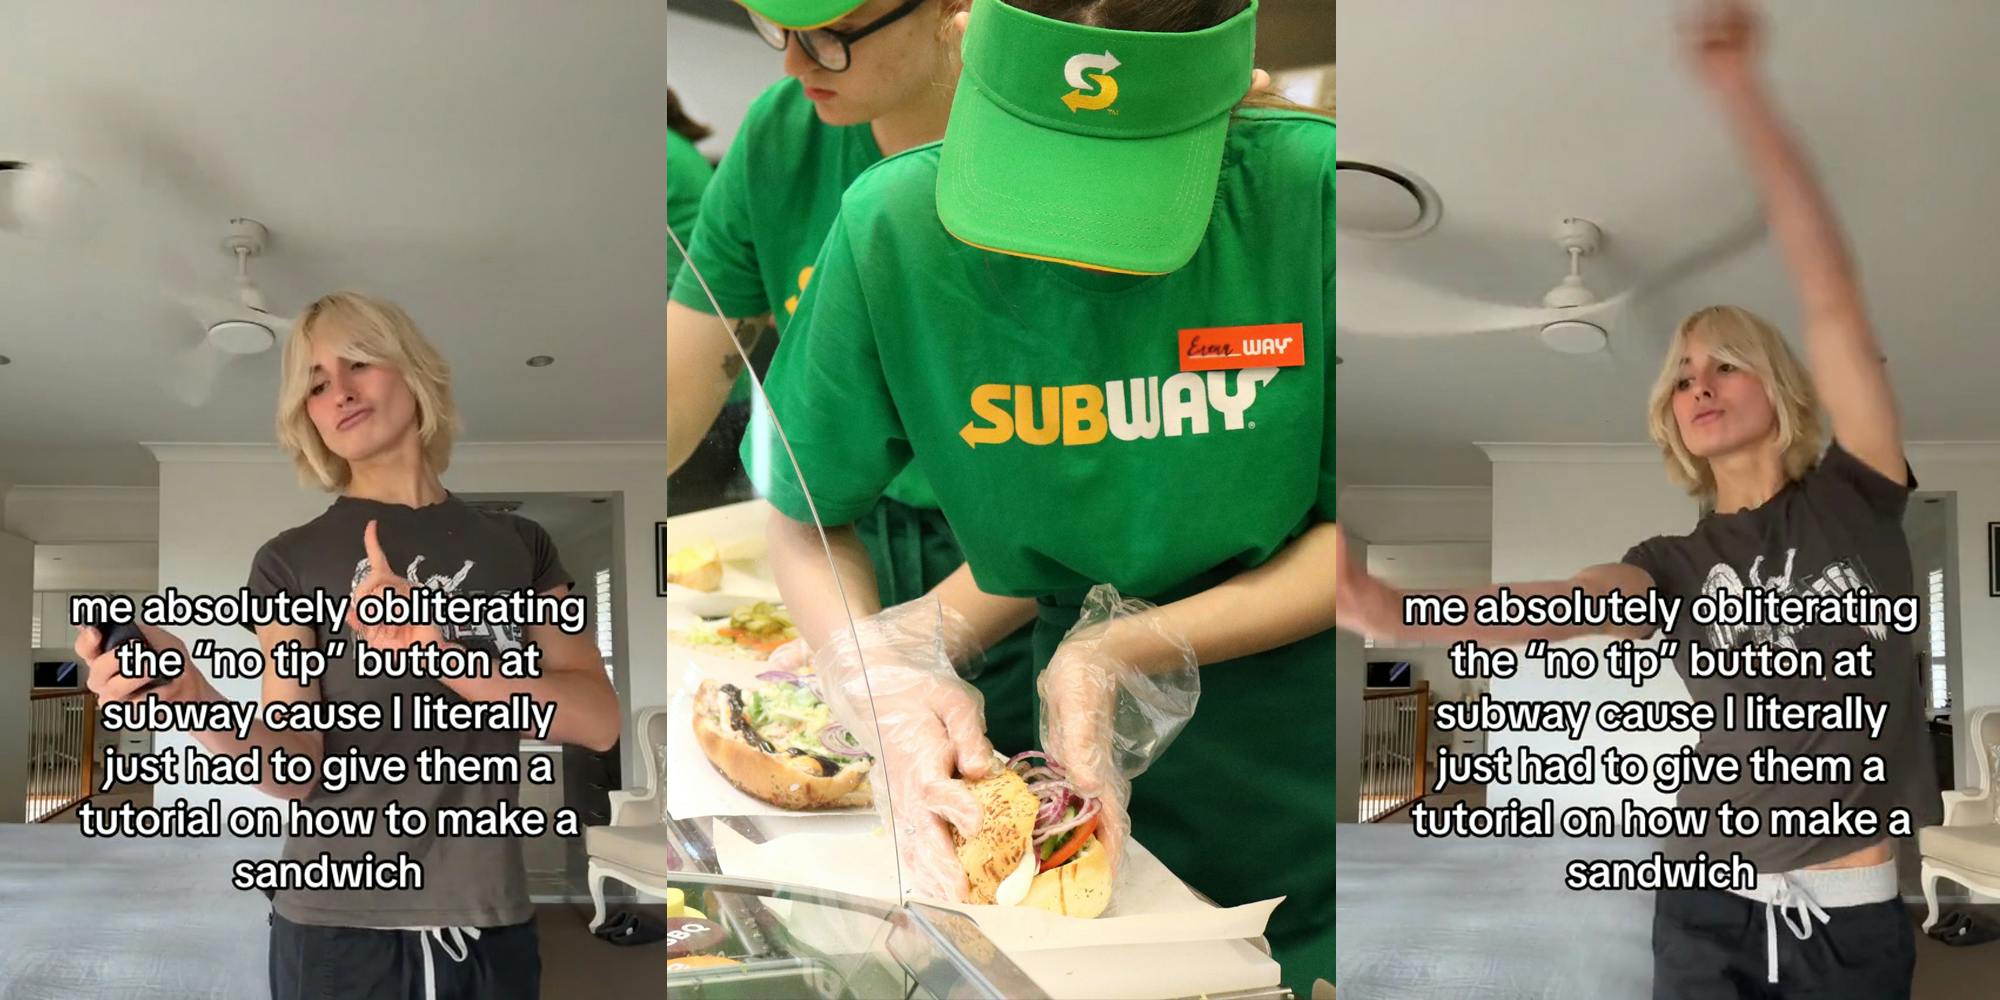 ‘My sub WAS EIGHTEEN DOLLARS’: Customer says she ‘obliterates’ no tip option at Subway